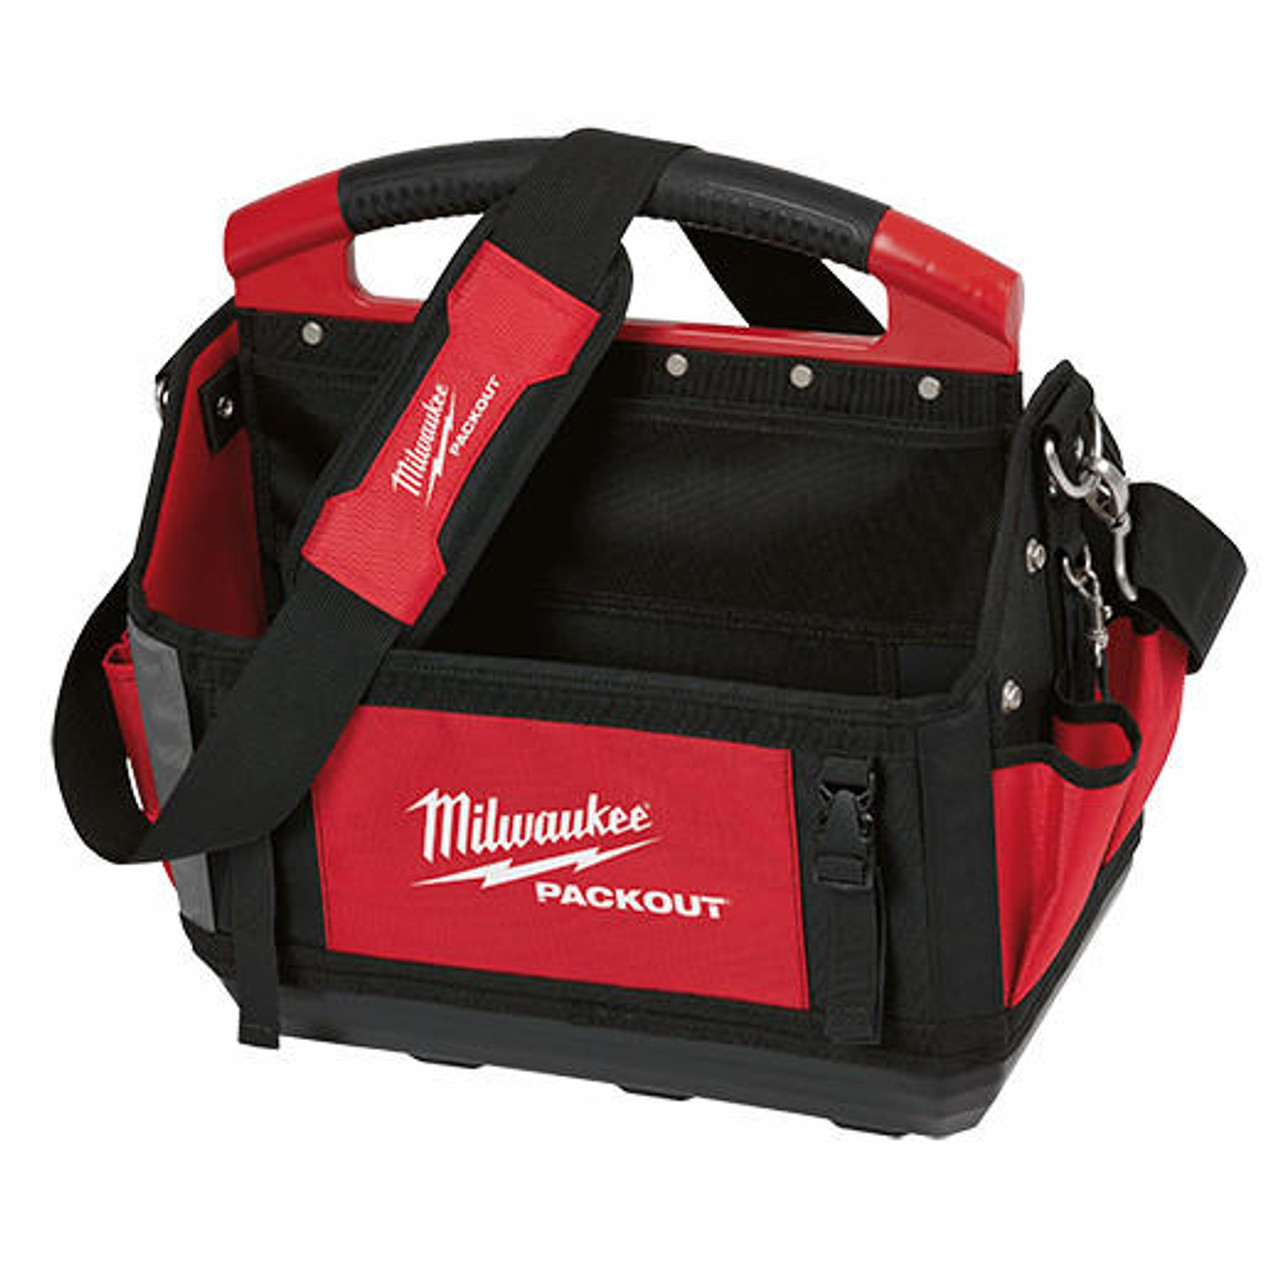  Milwaukee PACKOUT 15" Tote 48-22-8315 